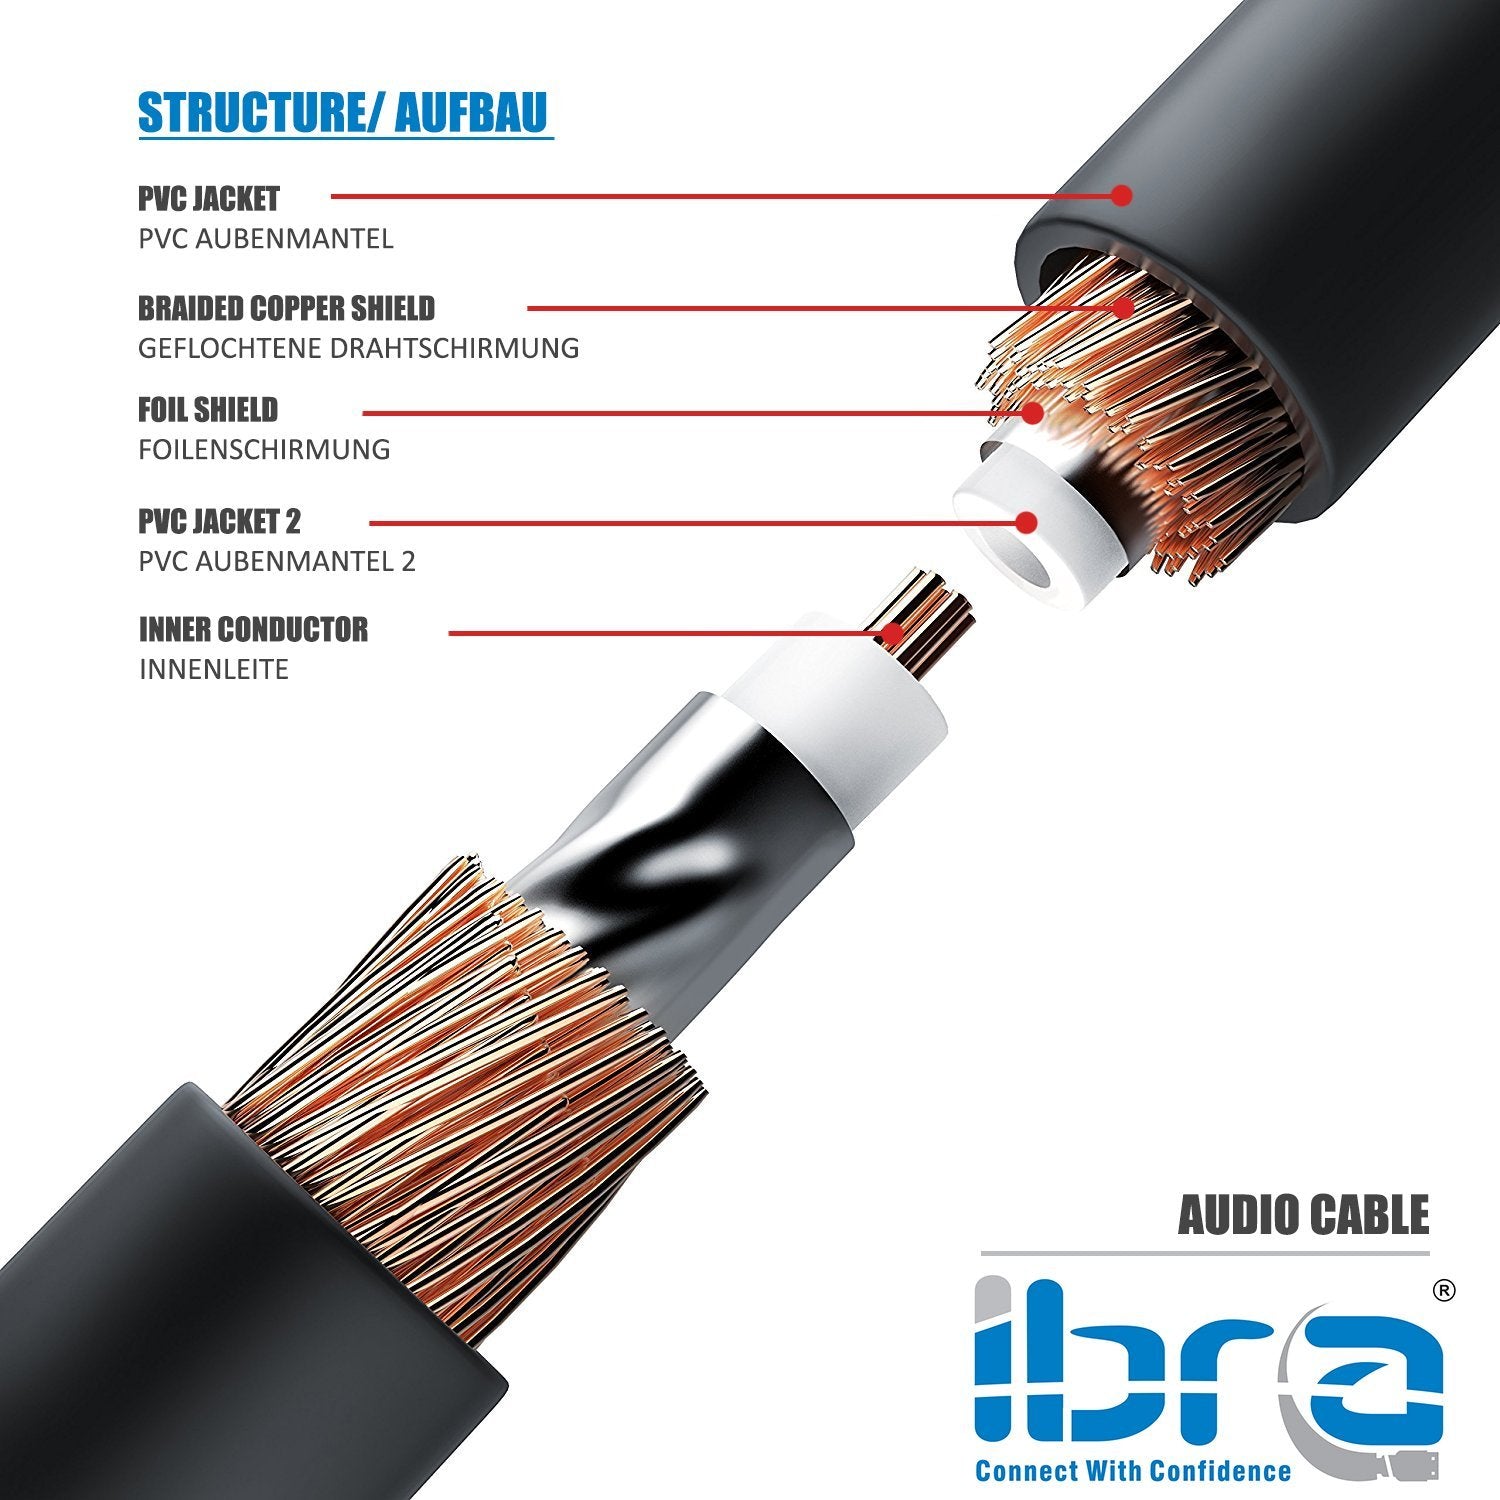 IBRA 3M Y Cable / Subwoofer Cable / Audio Cable / RCA Cable (1 x RCA to 2 x RCA) - GUN Metal Range